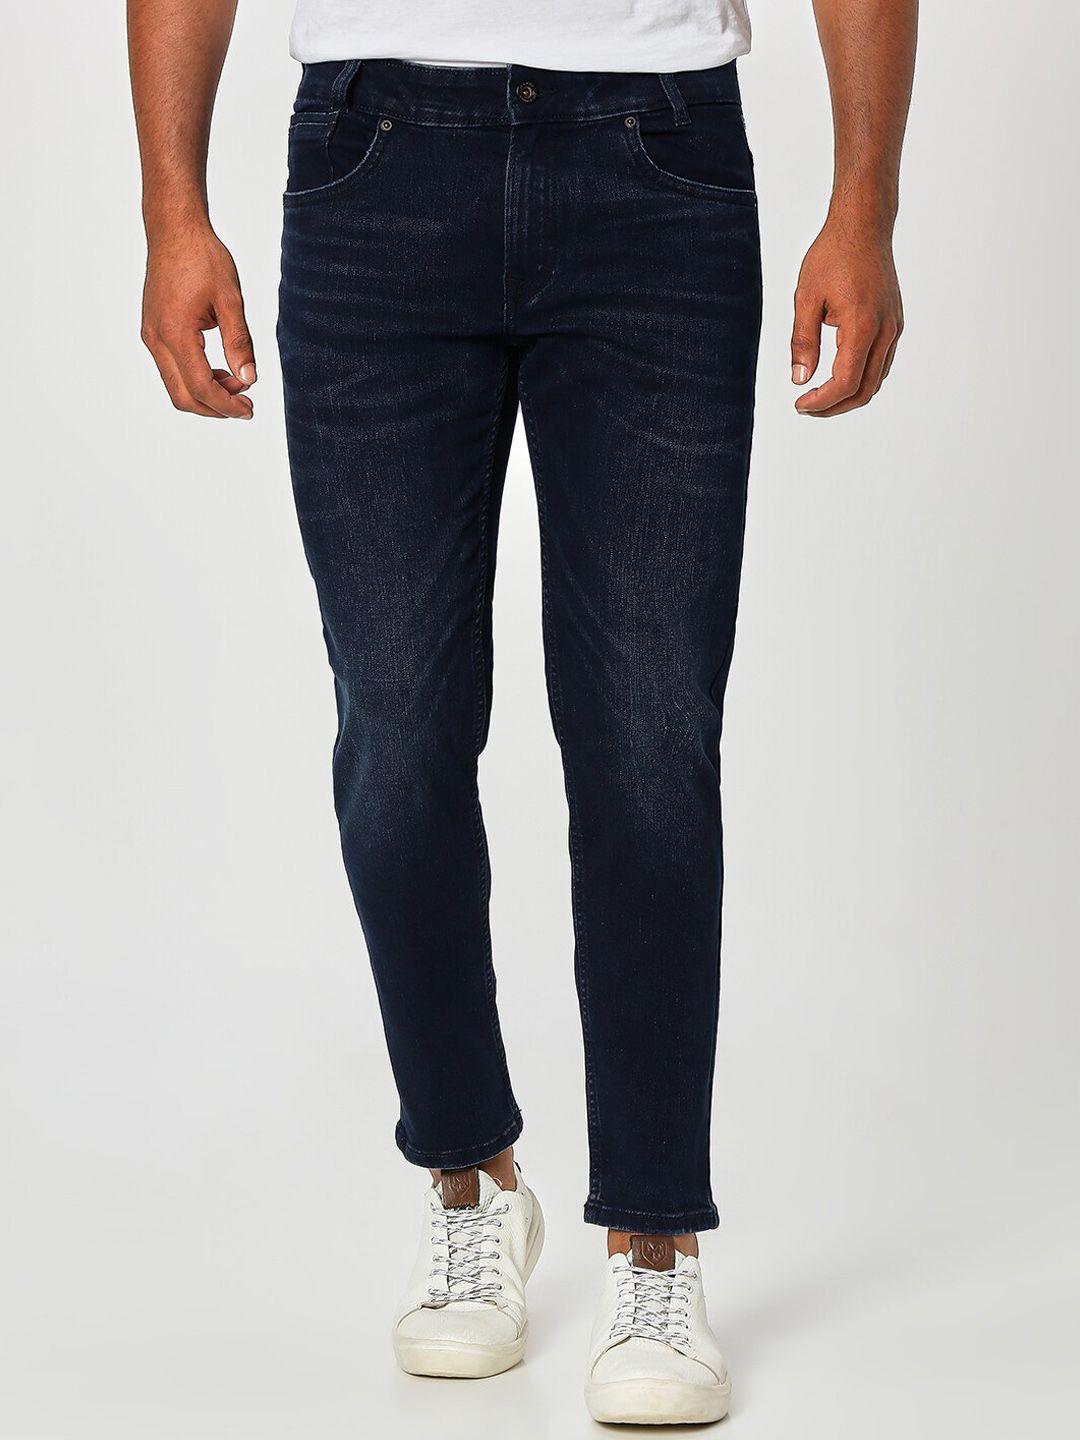 mufti-men-tapered-fit-light-fade-stretchable-jeans